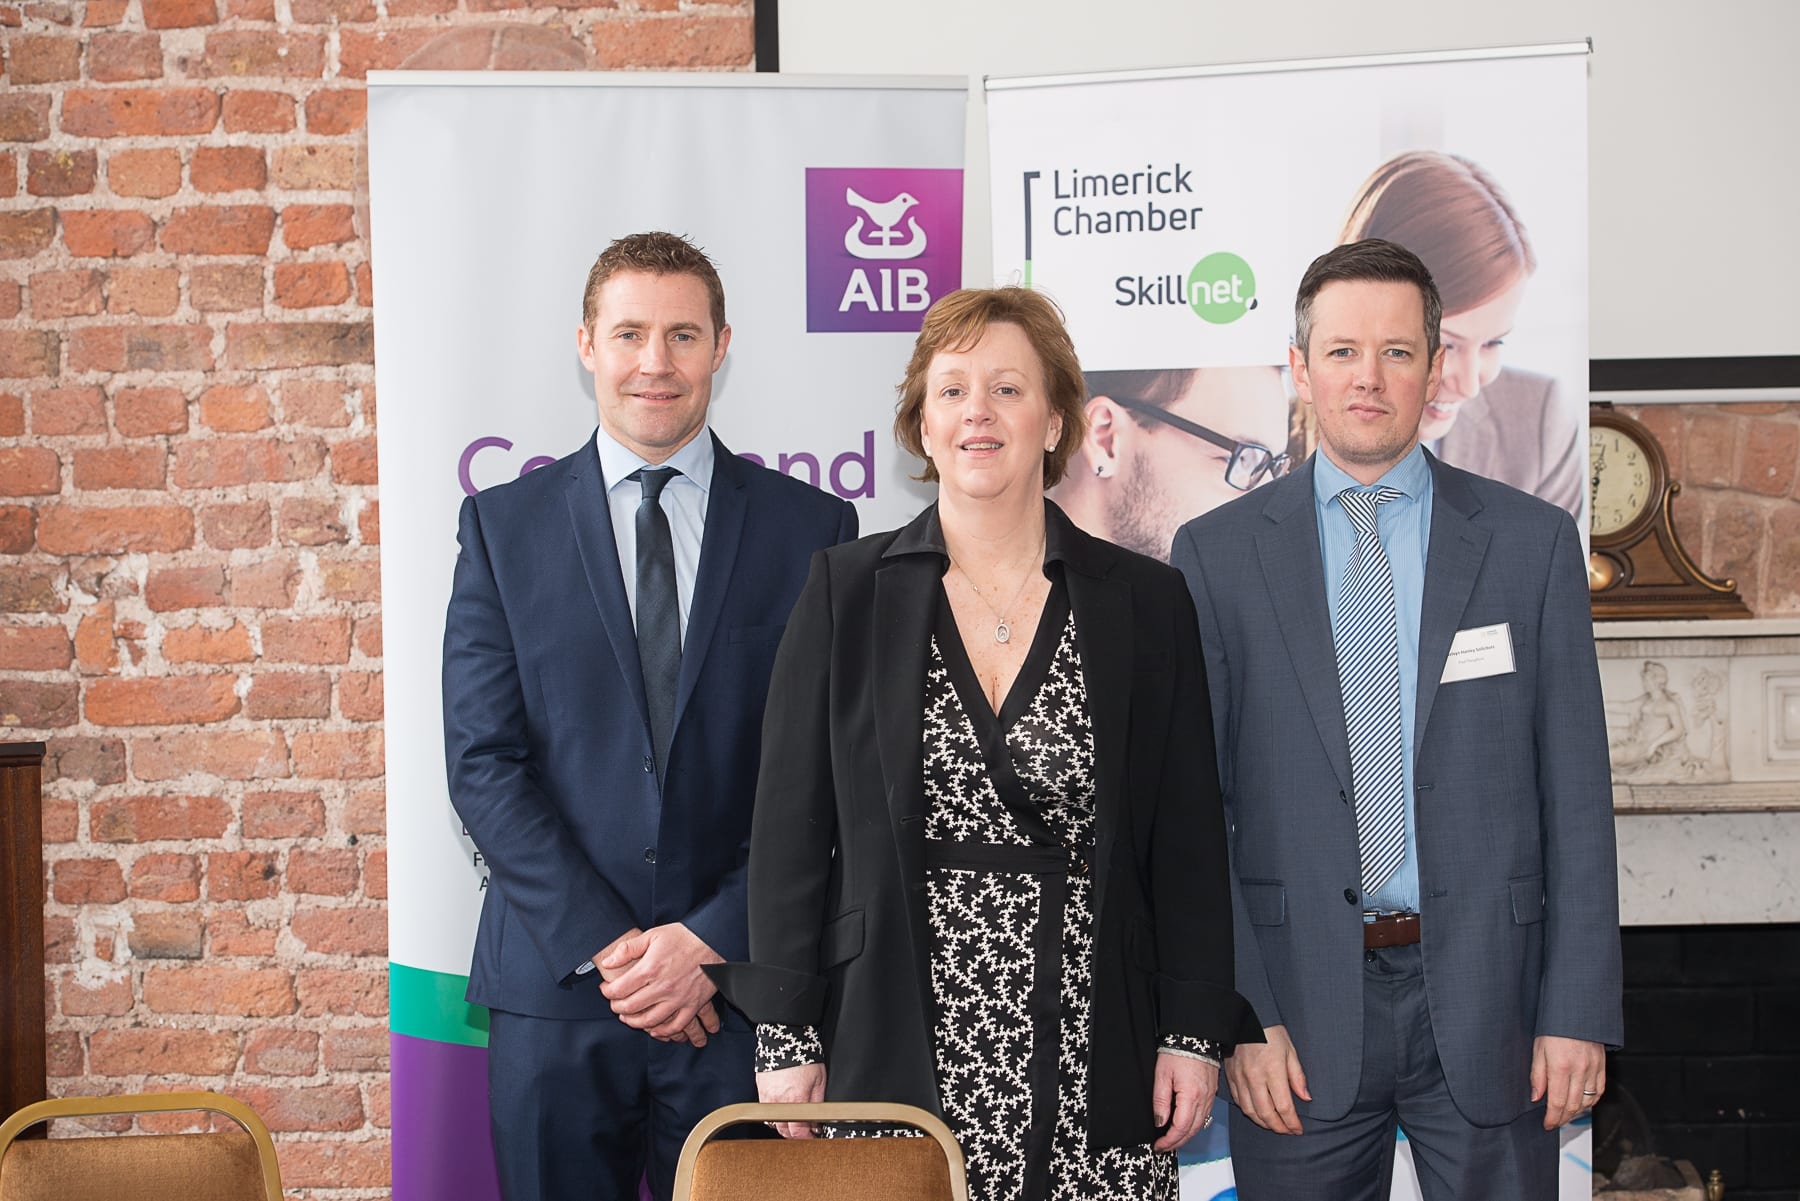 At the Limerick Chamber Skillnet Working Lunchtime Networking with Donal Fitzgibbon was From left to right: Michael Roberts- Executive Relocation, Maria O’Gorman Skelly - Limerick Strand Hotel, Paul Naughton - Melvyn Hanely Solicitors. 
Image by Morning Star Photography 